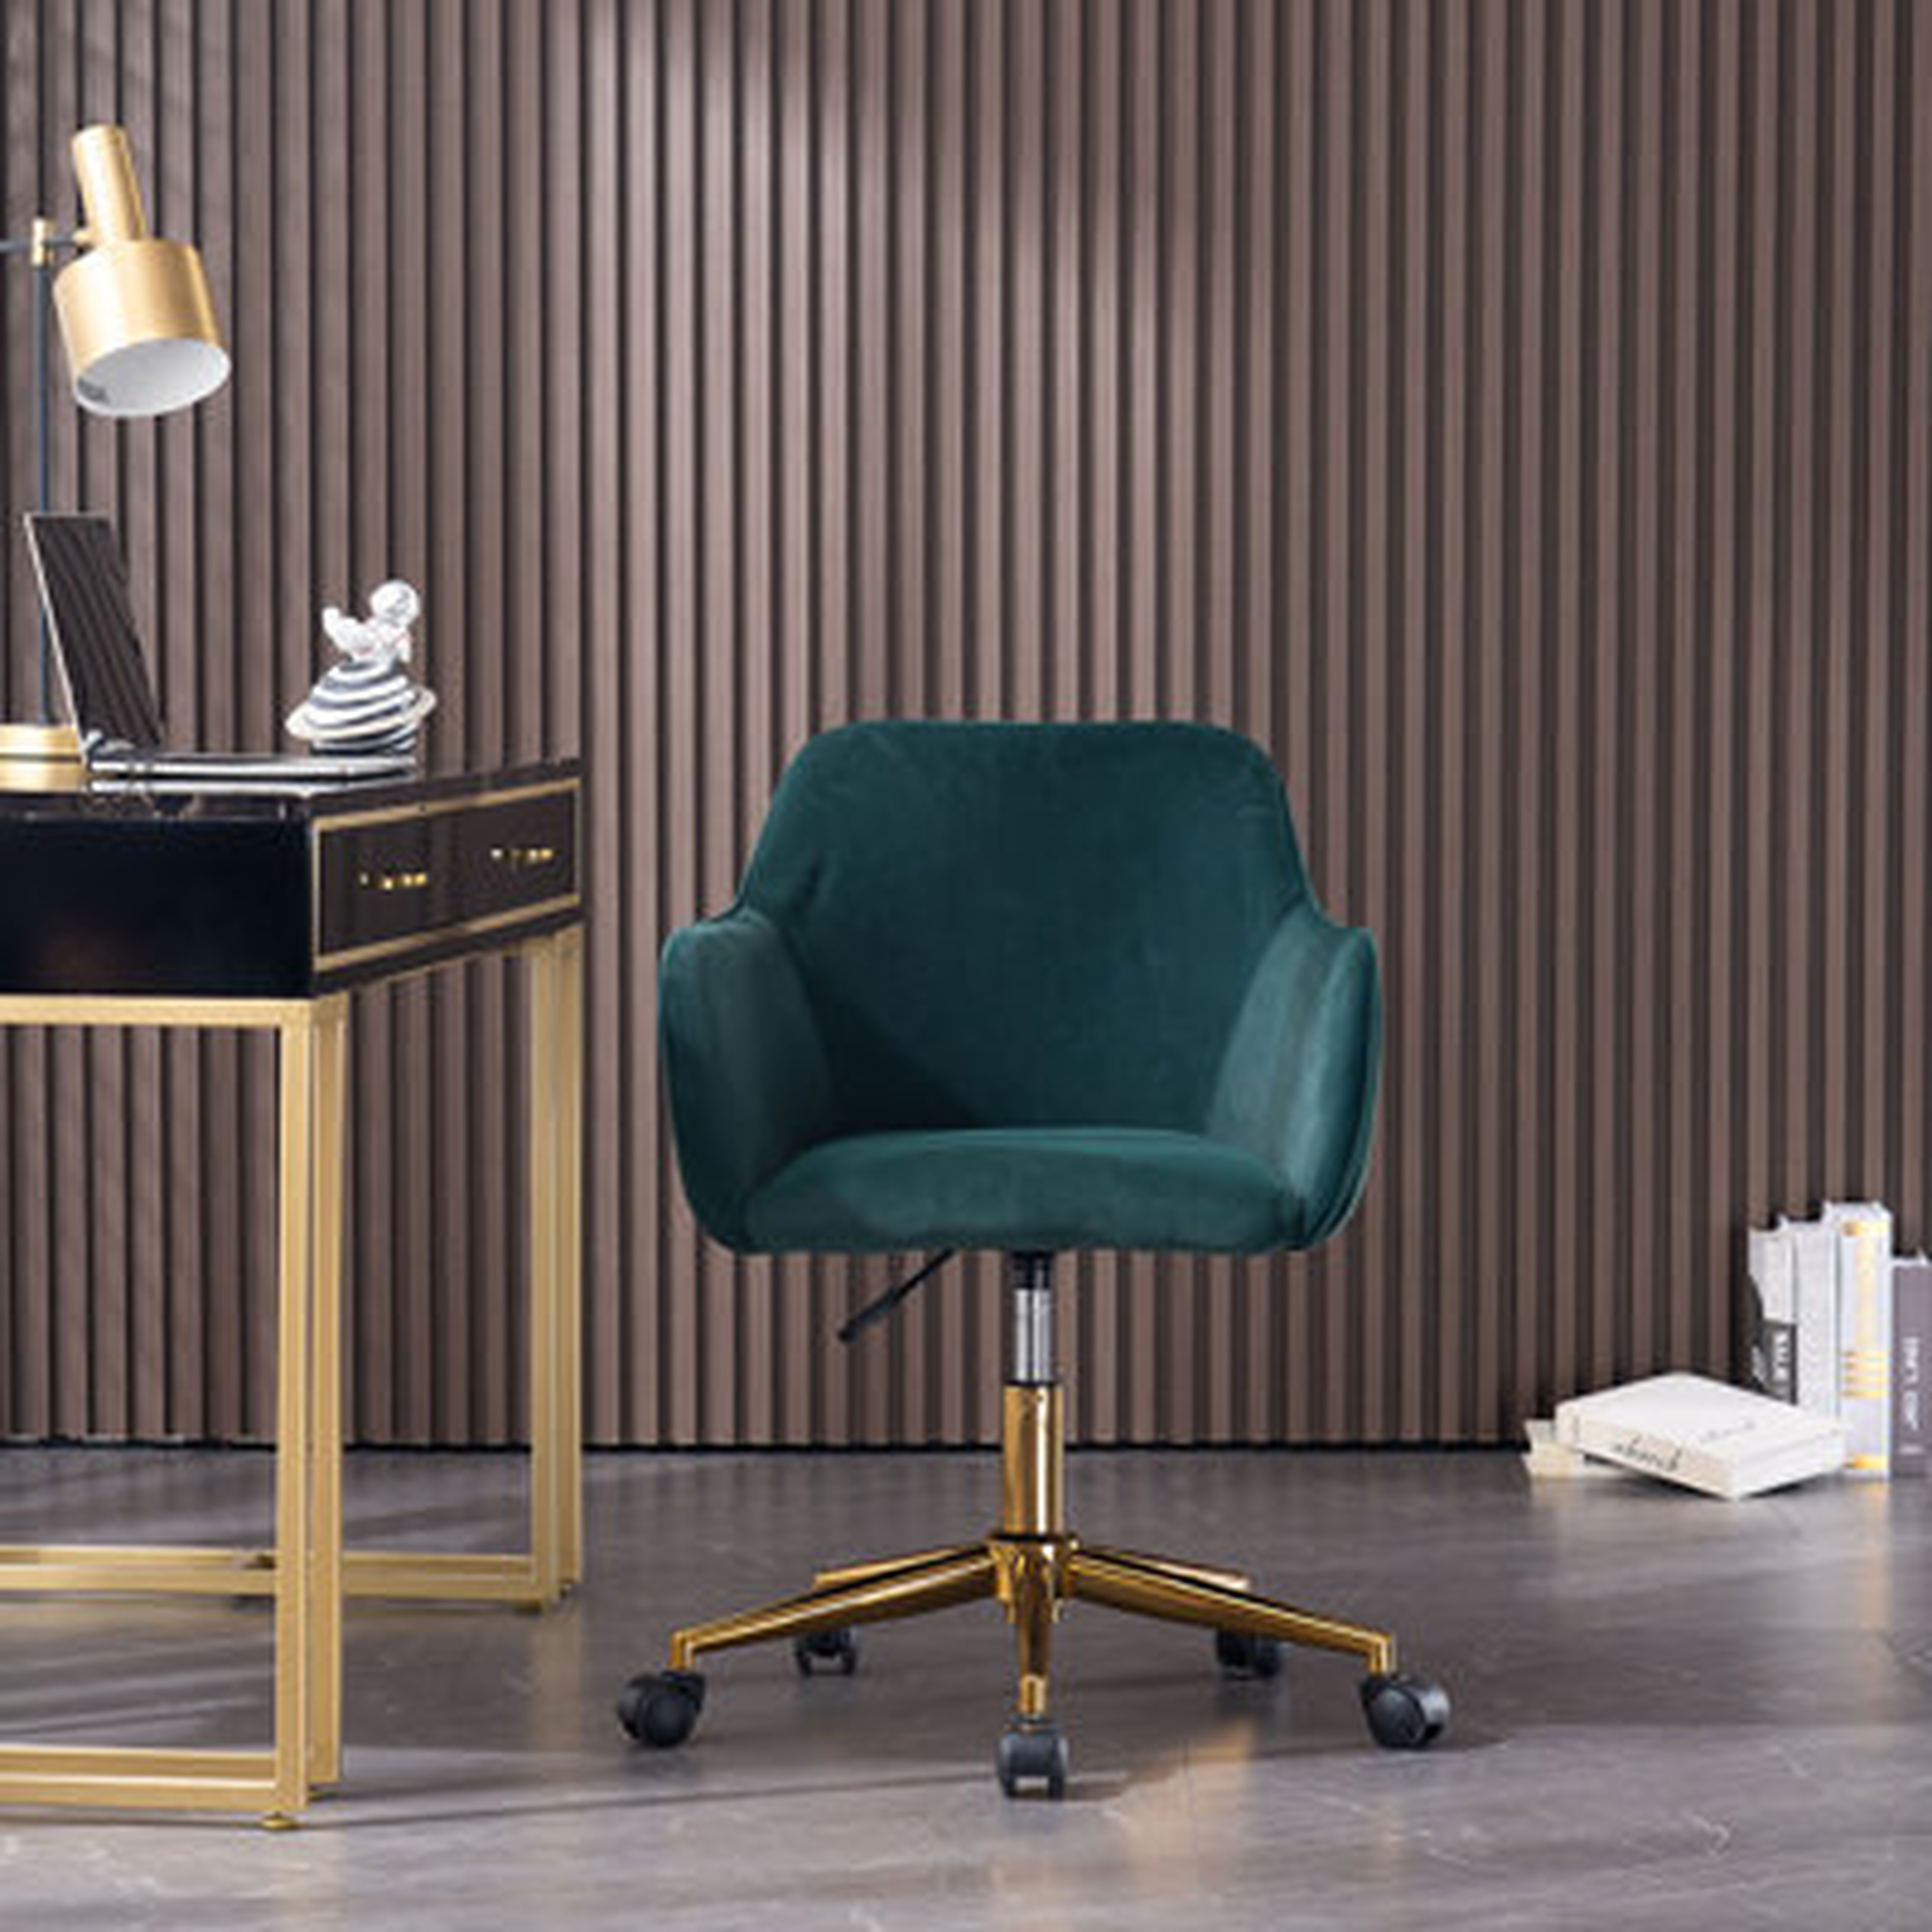 Velvet Leisure Chair Adjustable 360° Swivel Upholstered Computer Task Chair With Arms And Wheels For Study Room Living Room Bedroom - Green - Wayfair